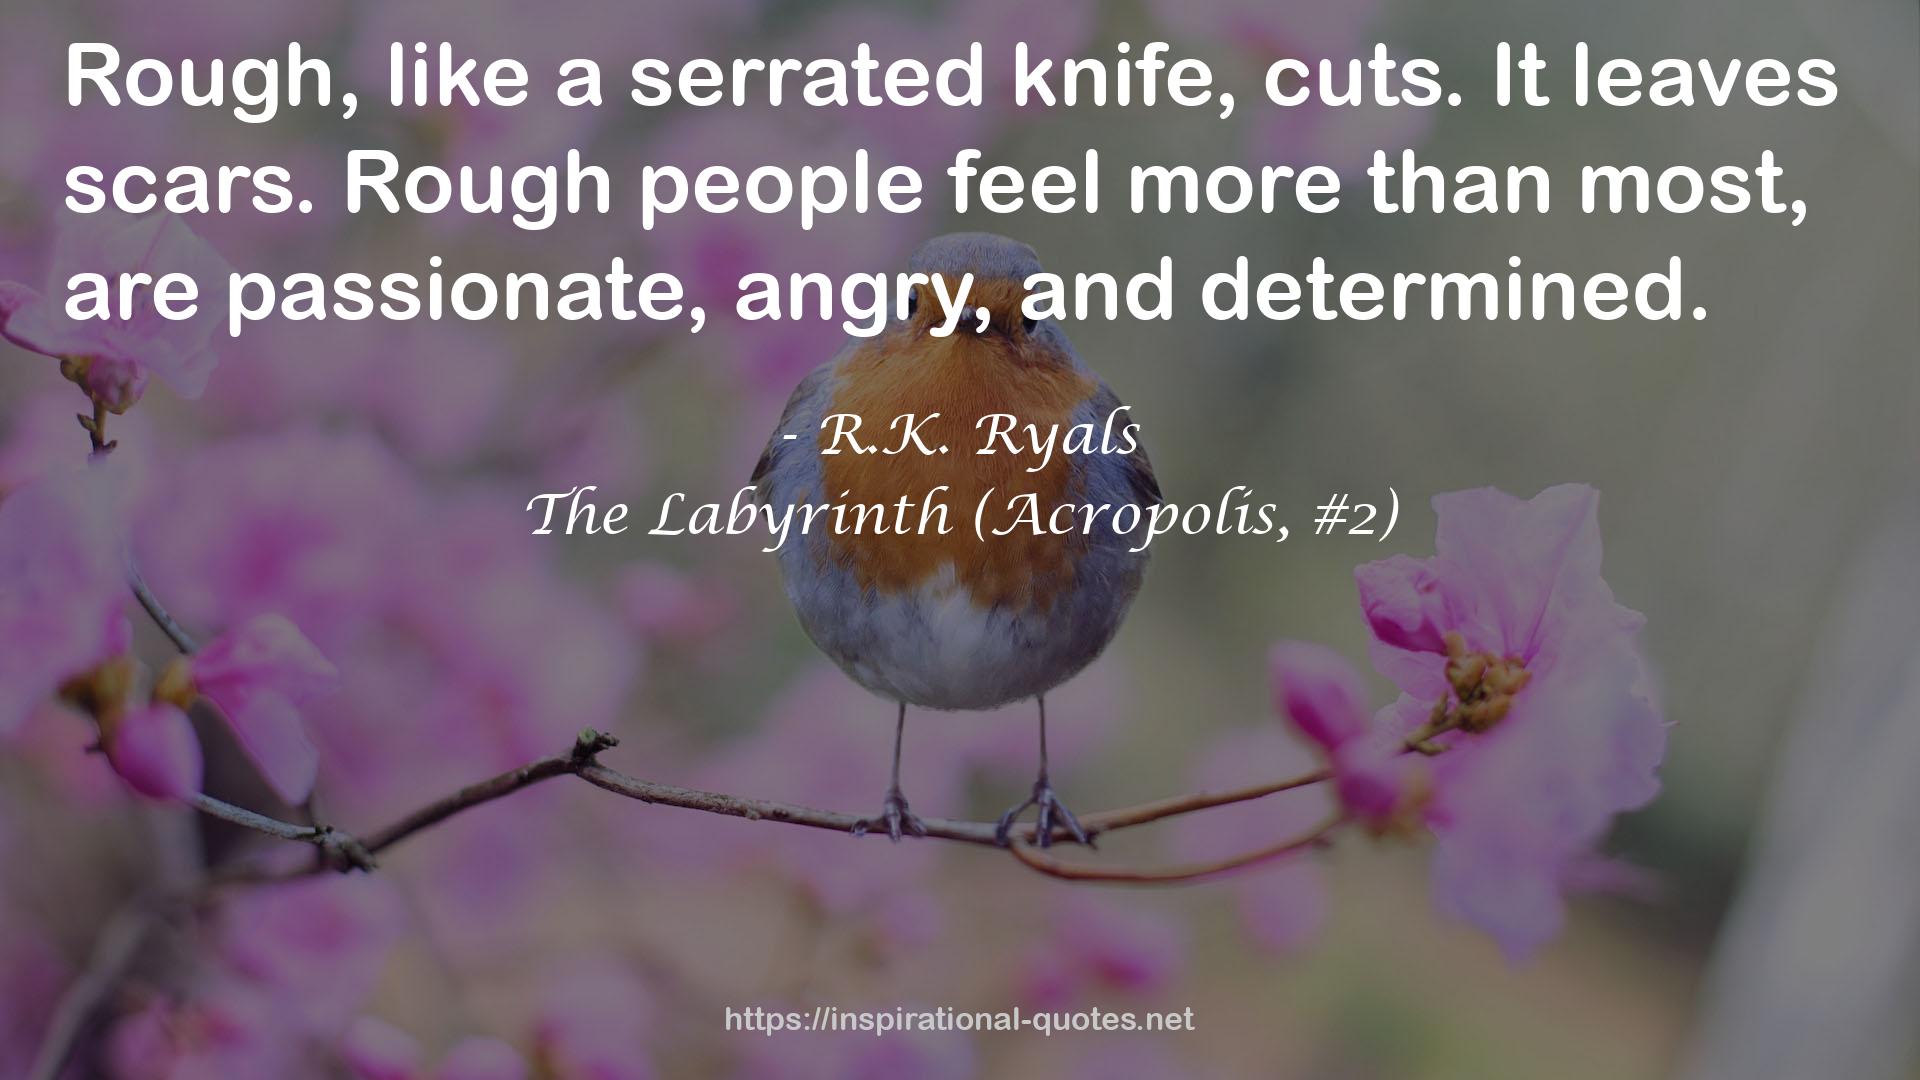 The Labyrinth (Acropolis, #2) QUOTES